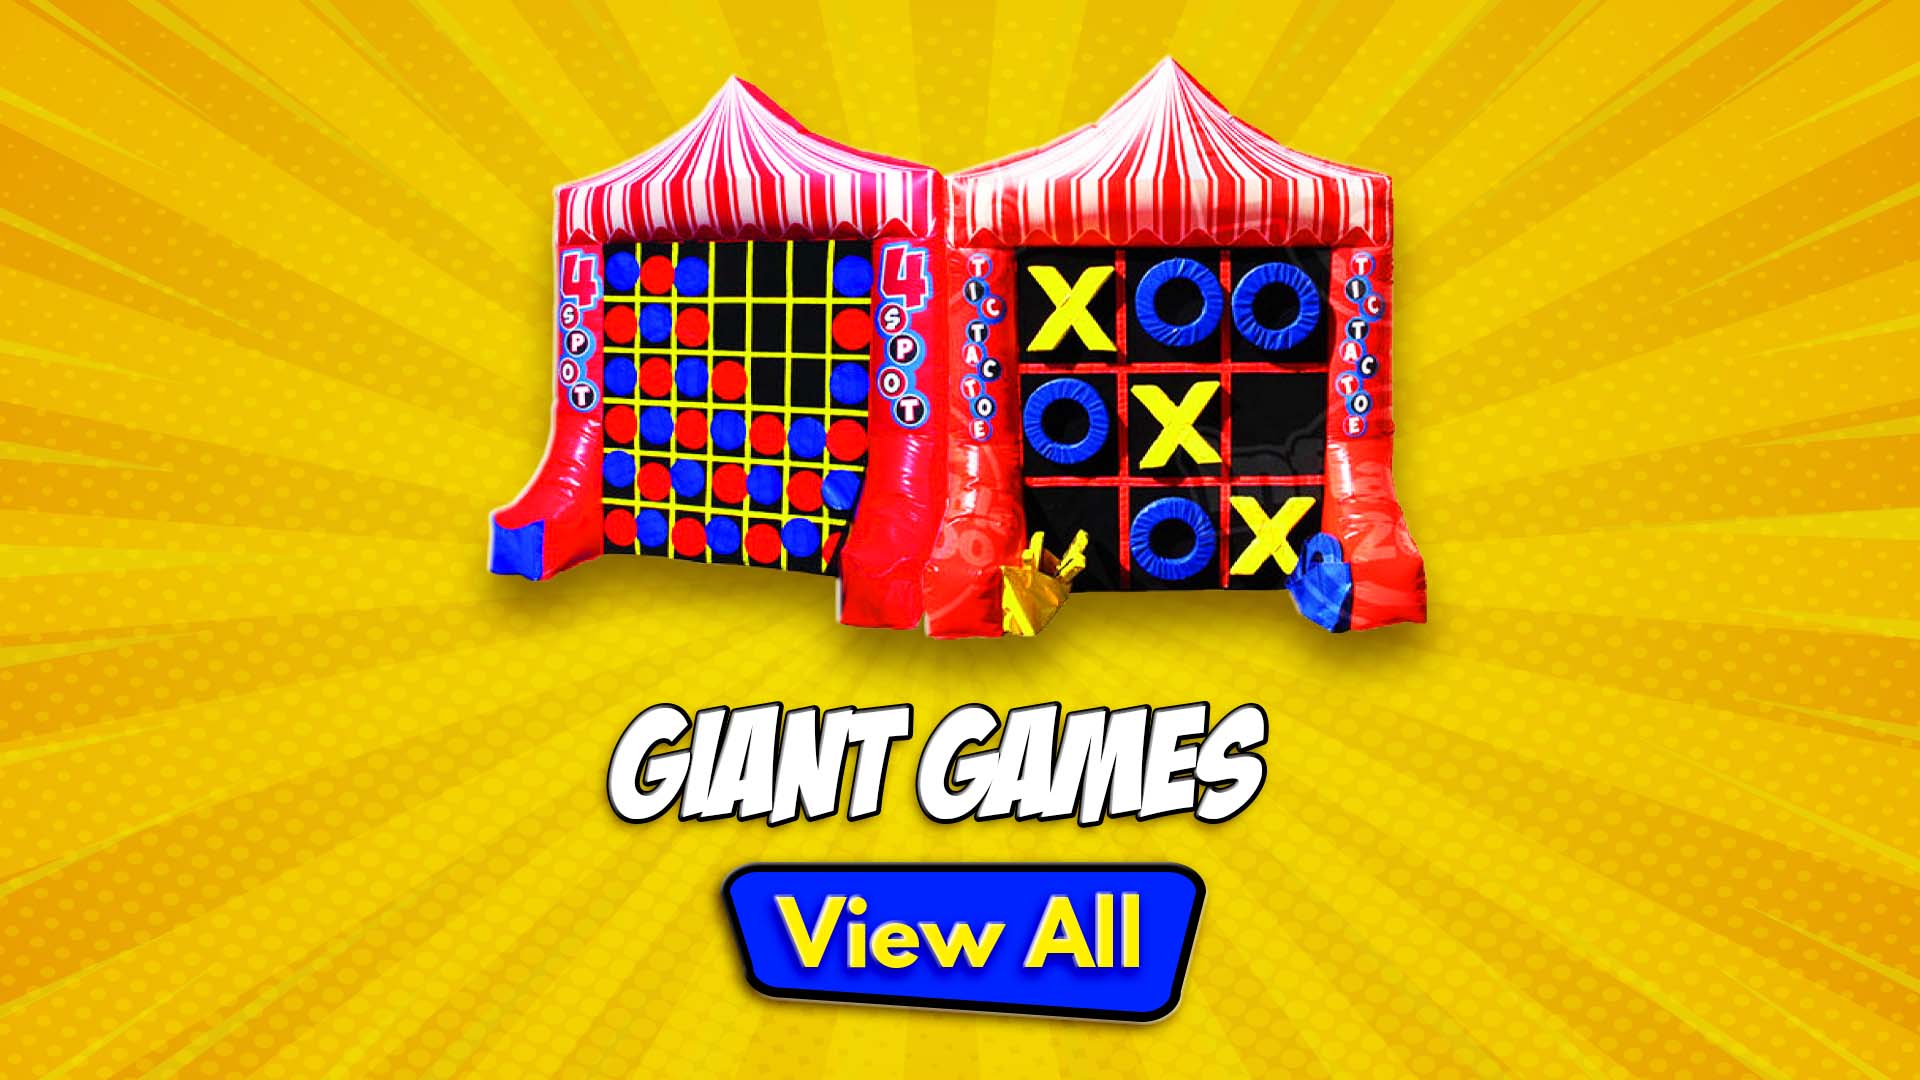 Giant Game Rentals